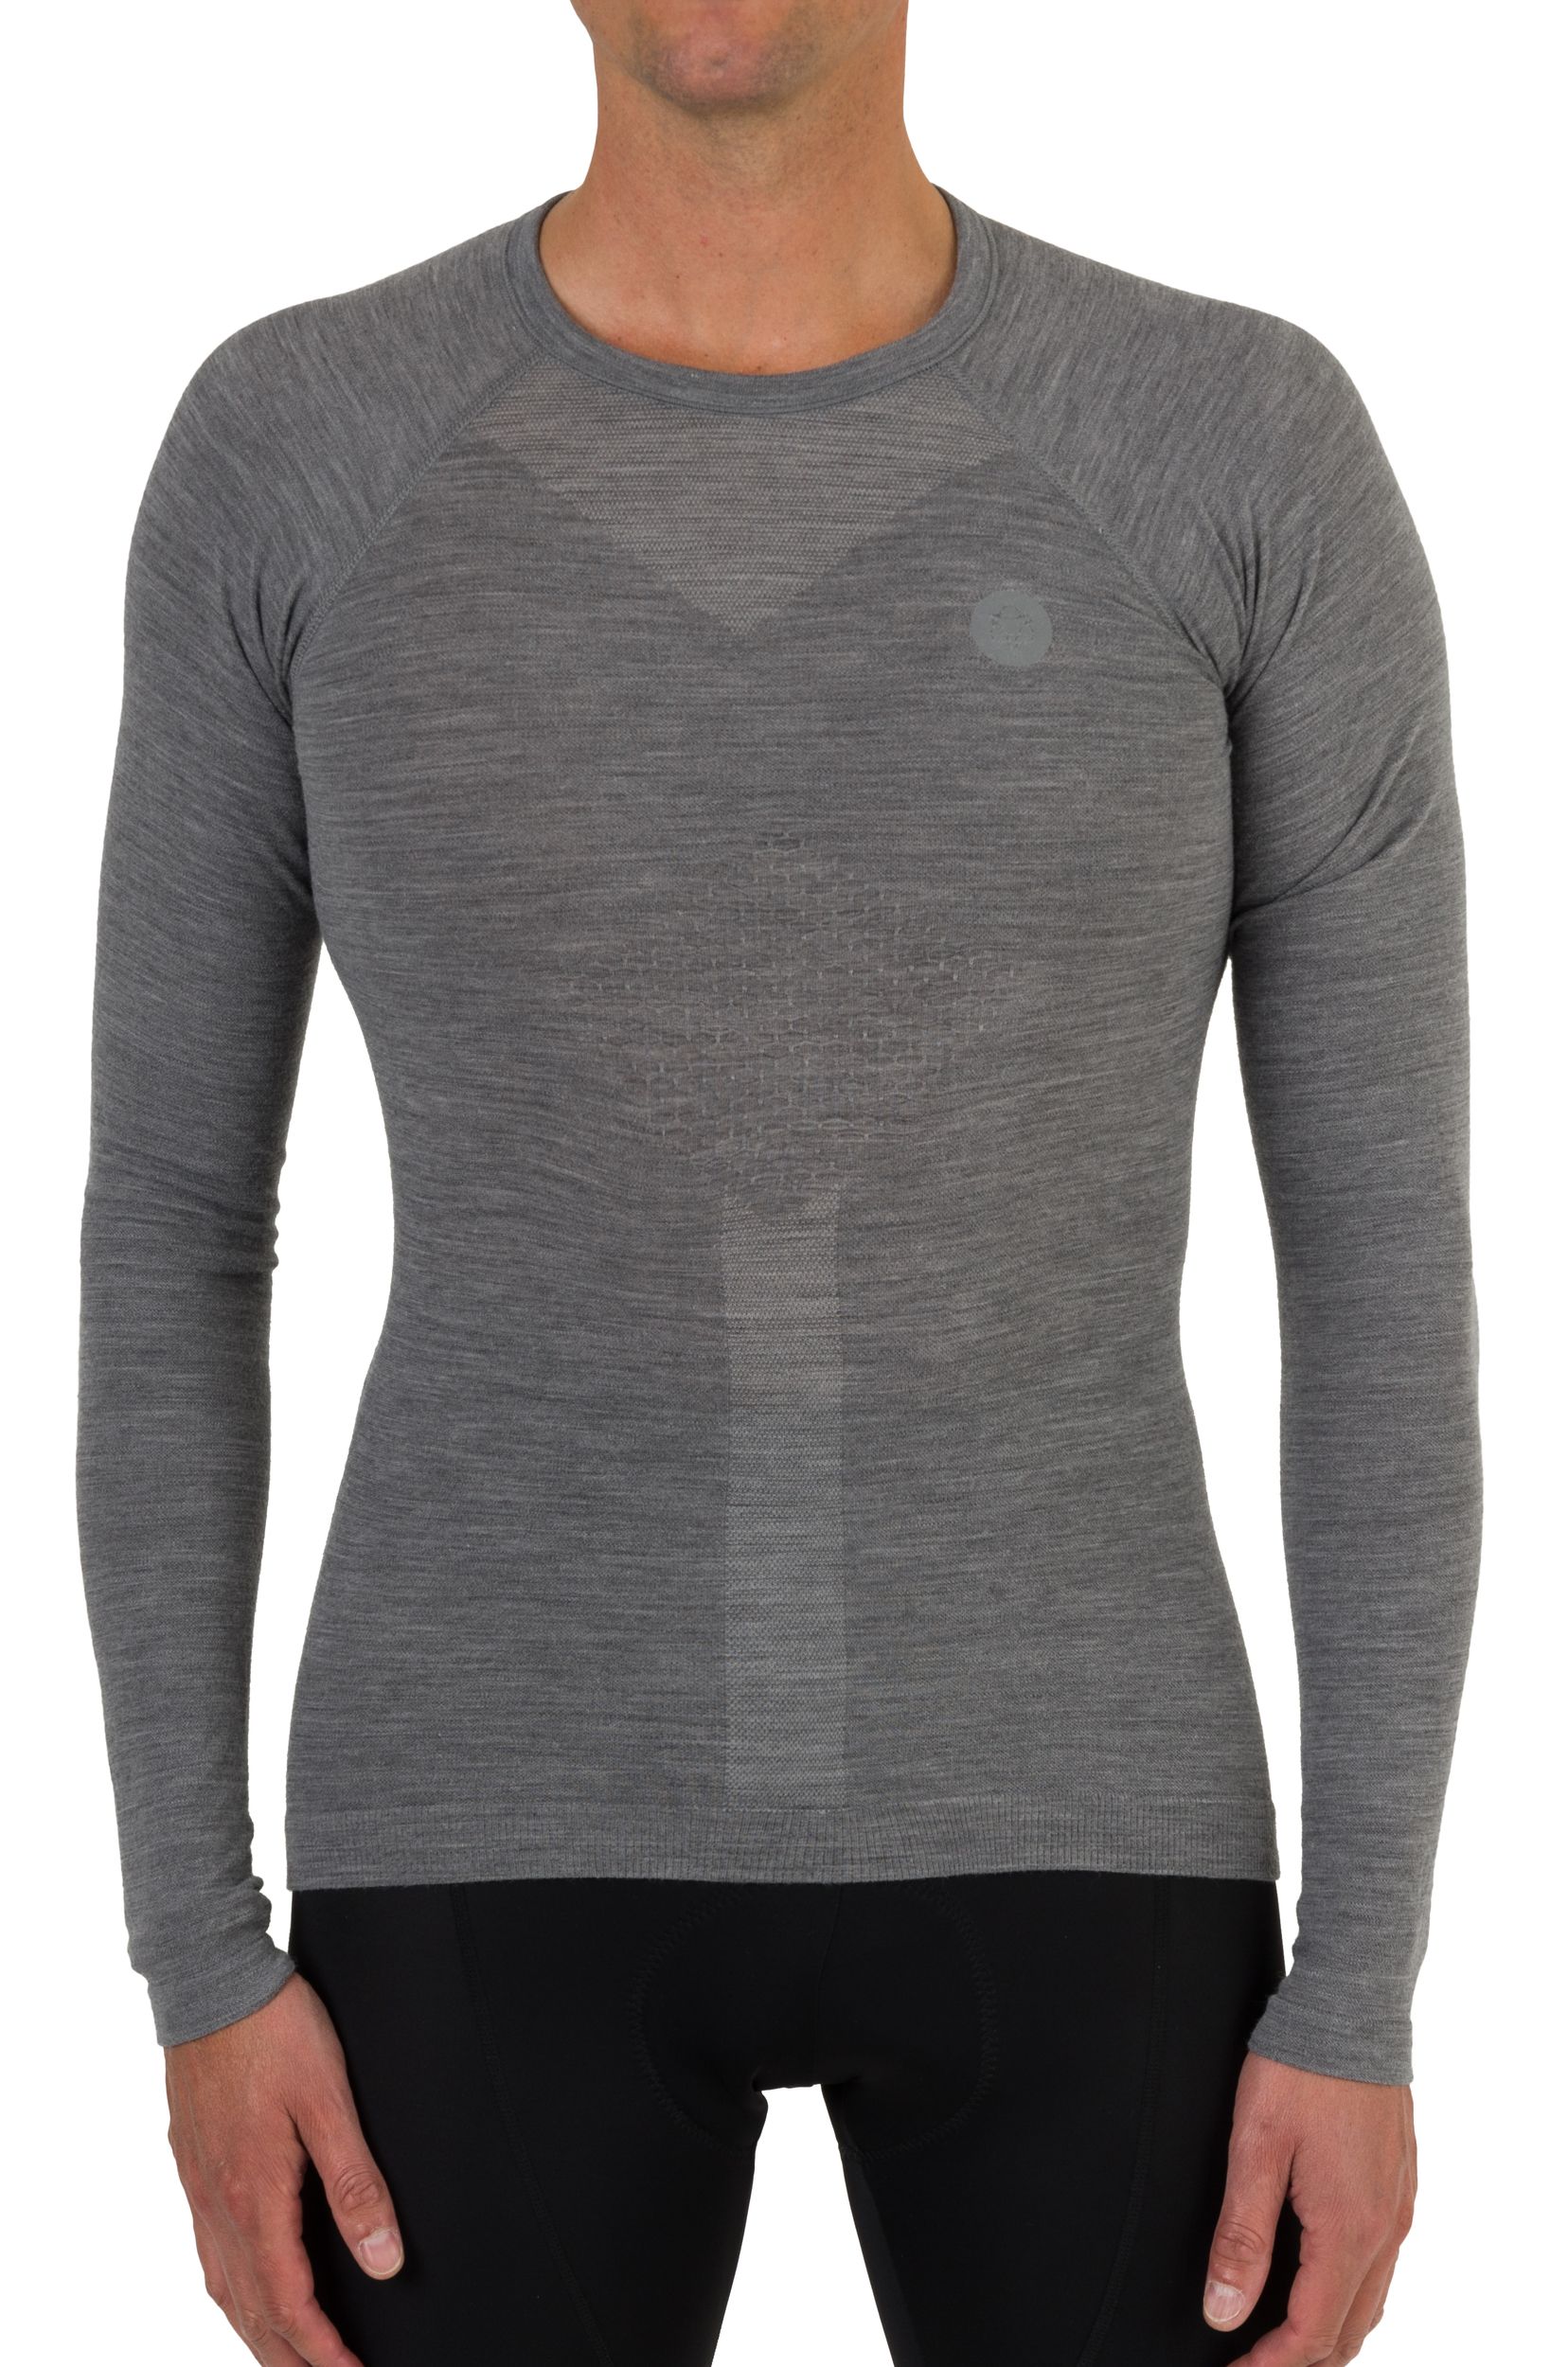 Winterday Merino Maillots de corps LS Essential fit example